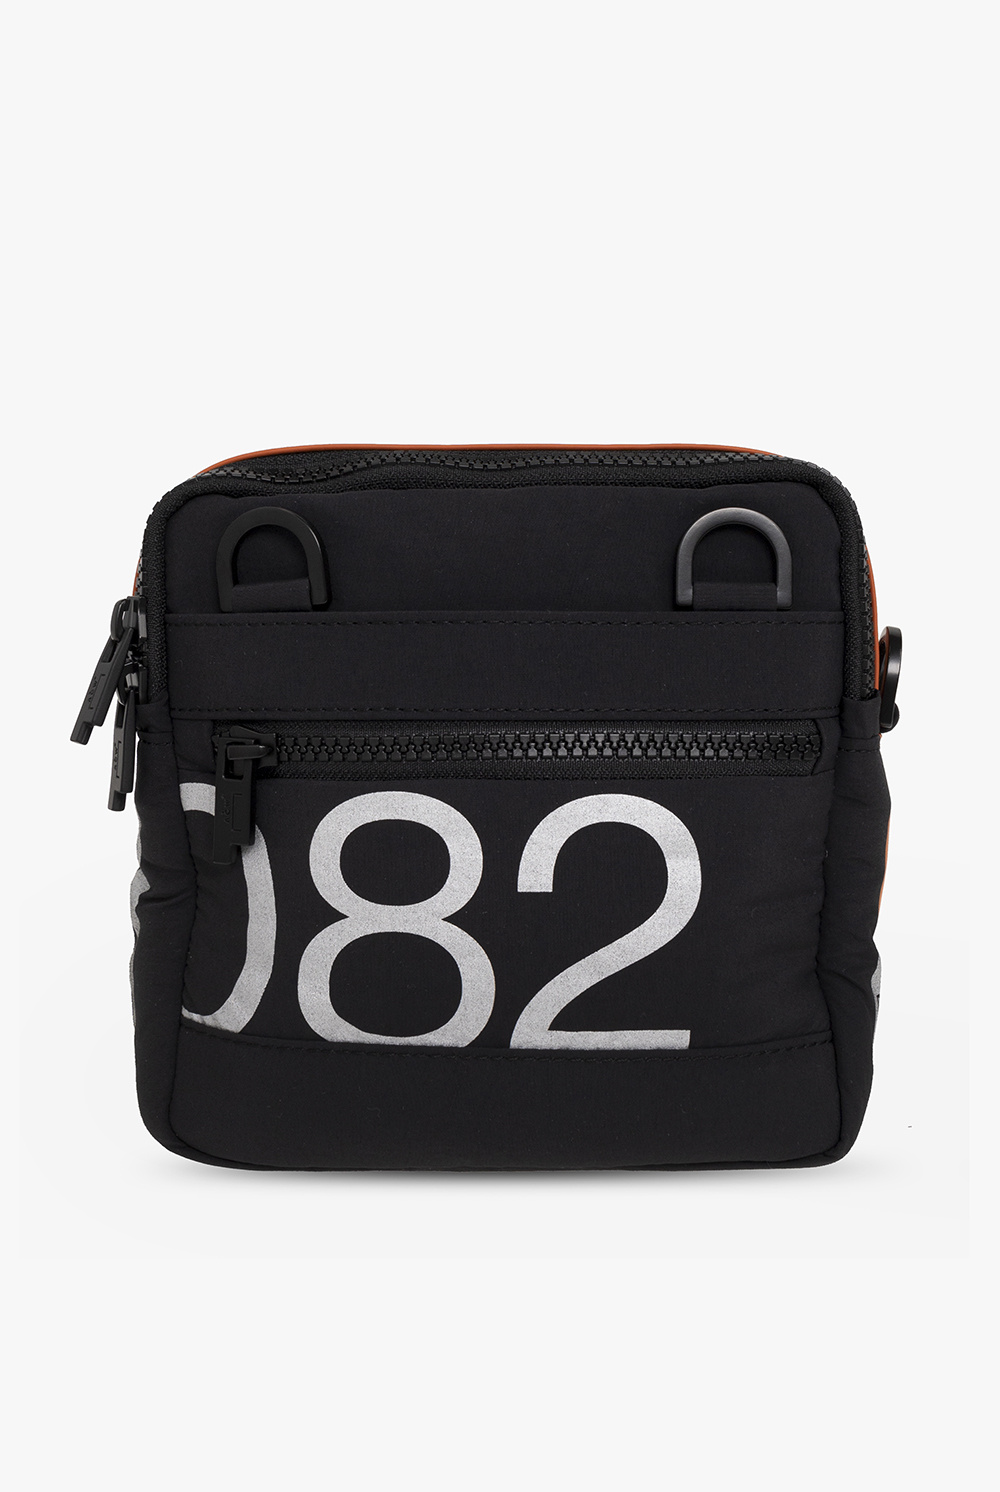 A-COLD-WALL* Shoulder ophidia bag with logo